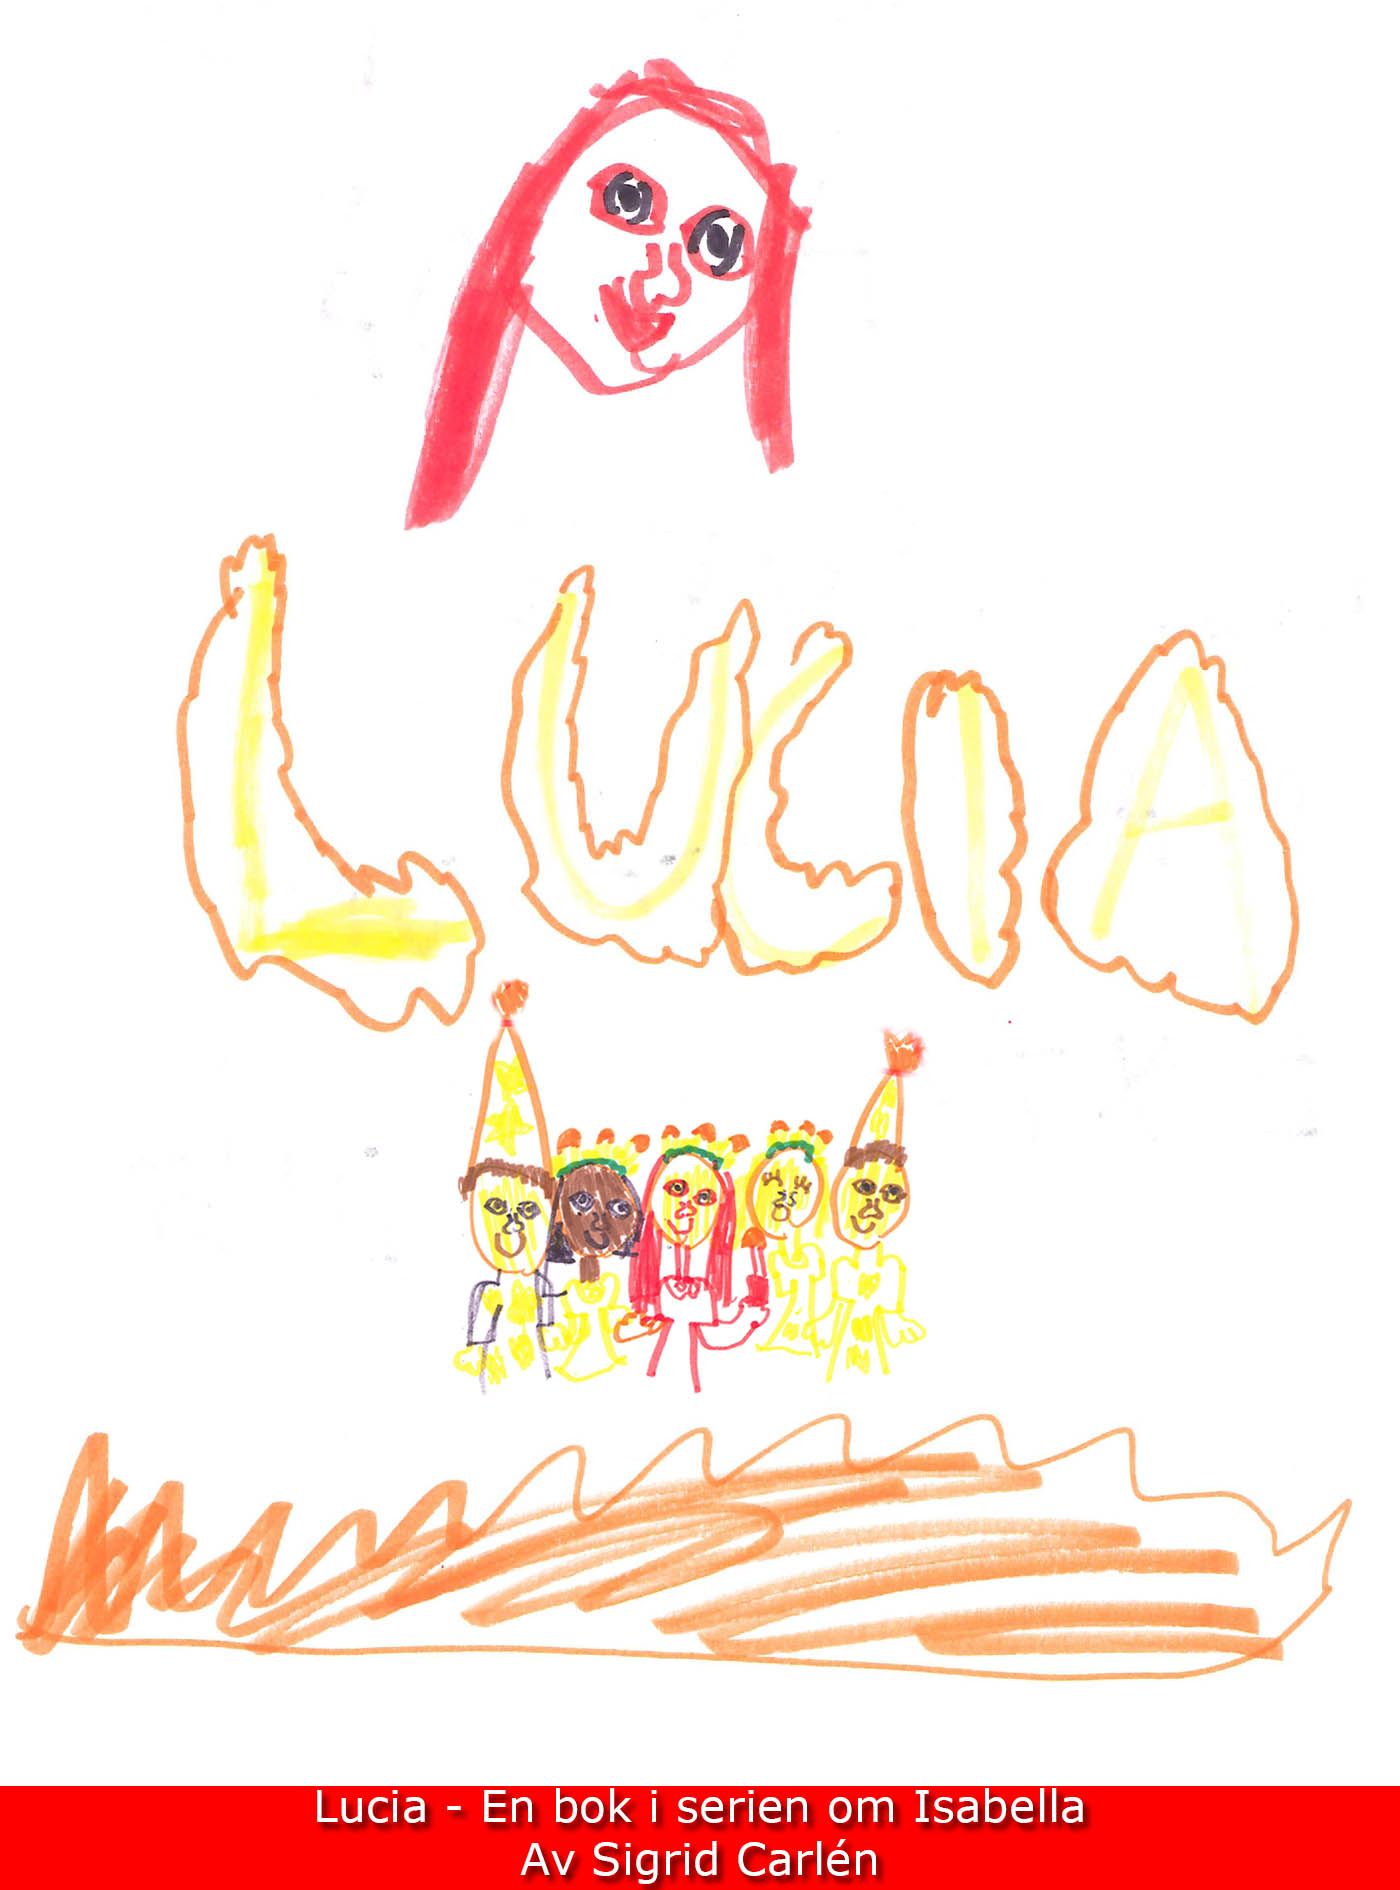 Lucia, eBook by Sigrid Carlén